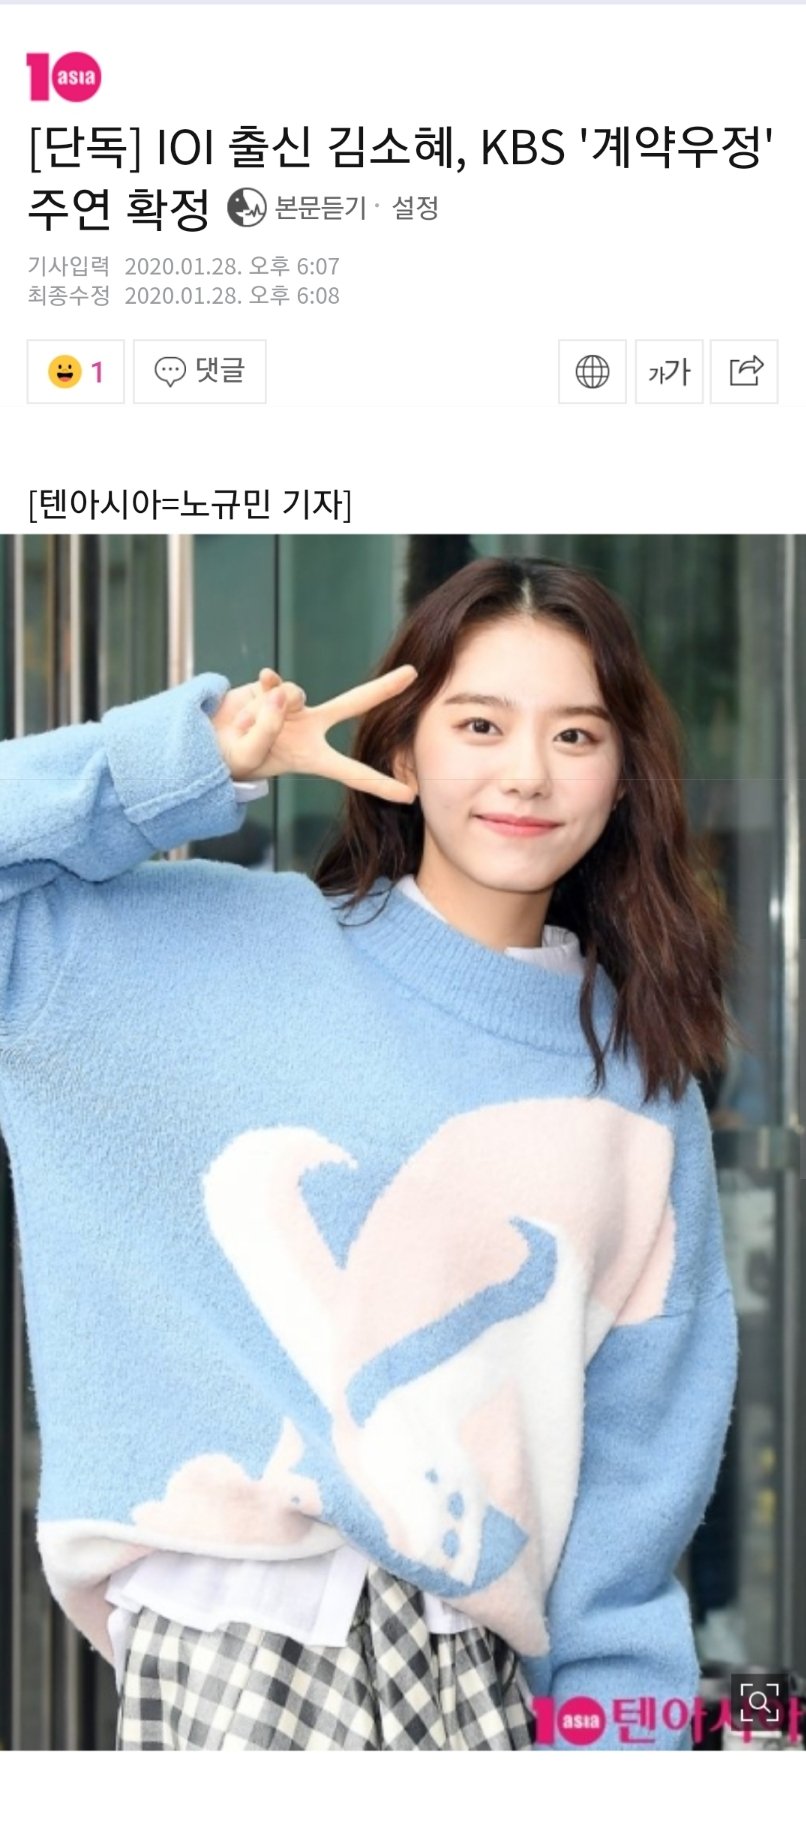 Sohye stars as KBS contract friendship